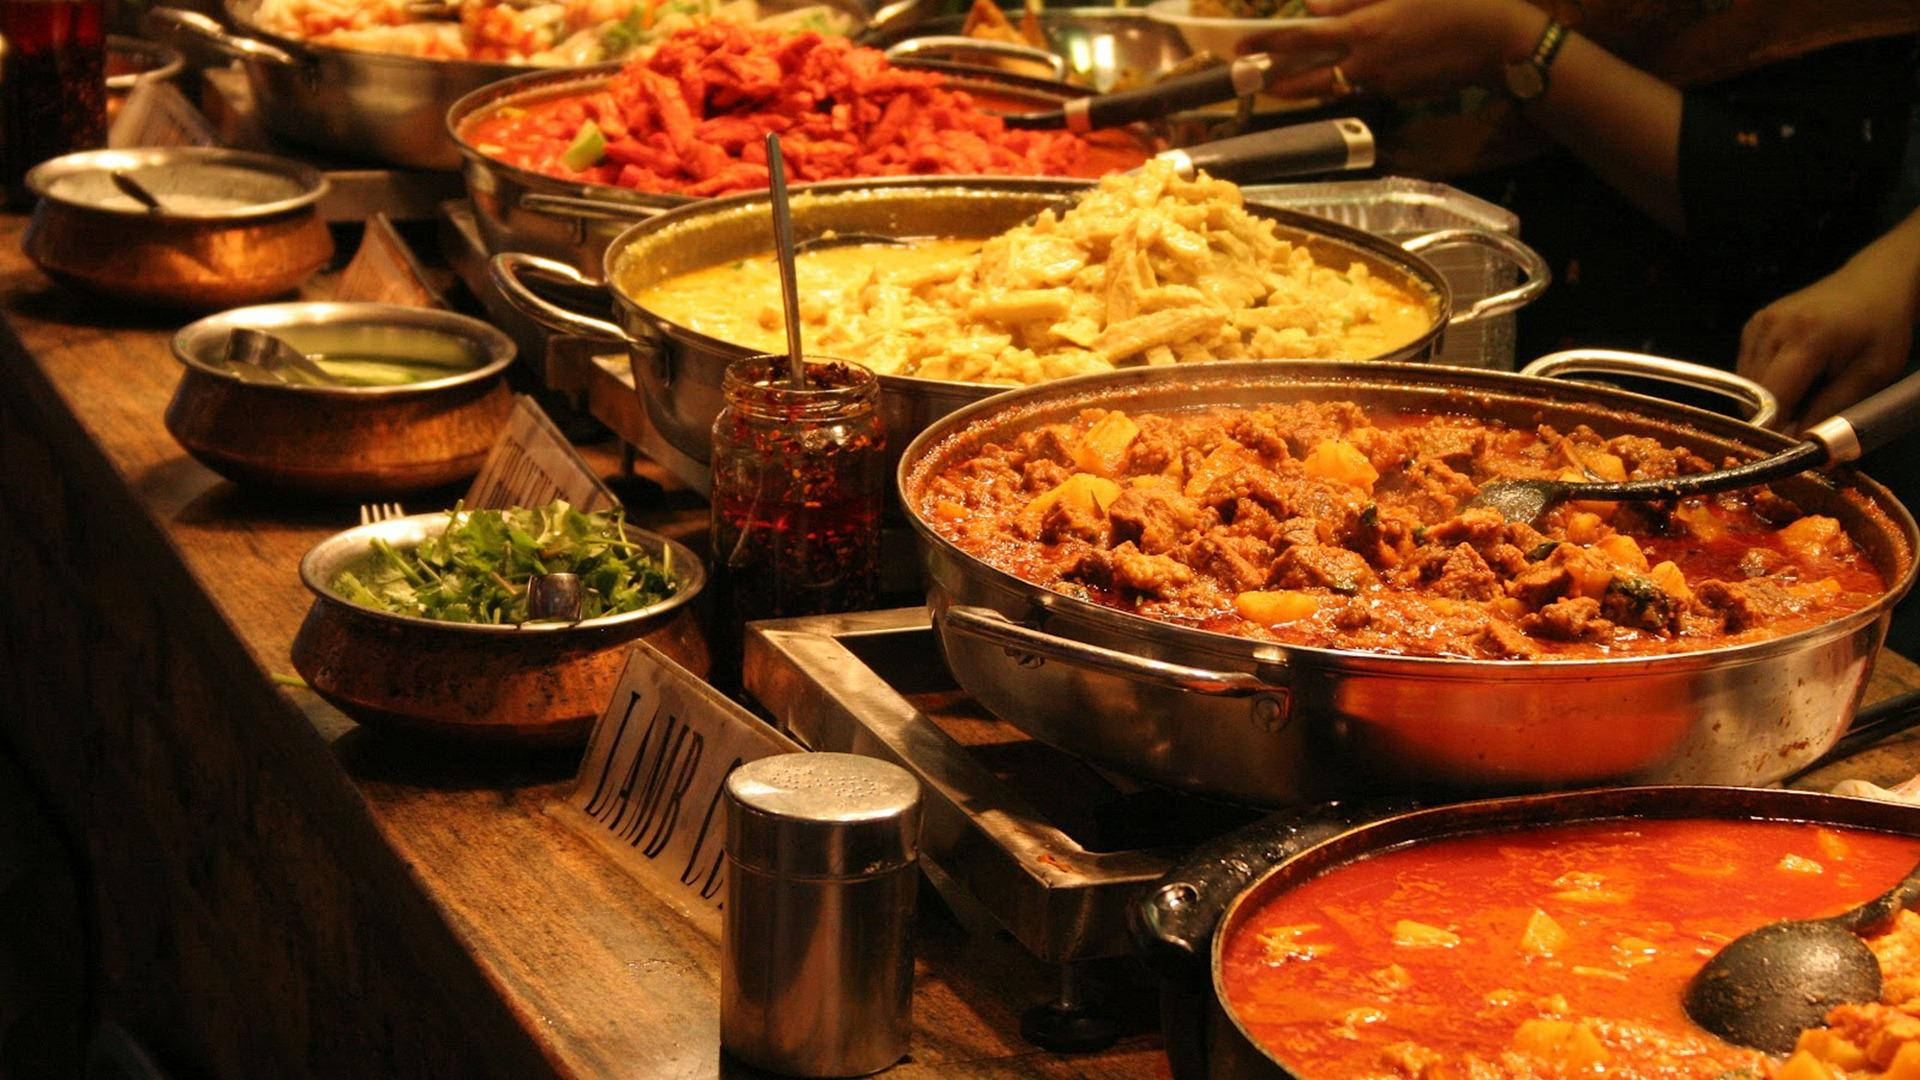 Awesome Indian Food Display Wallpaper